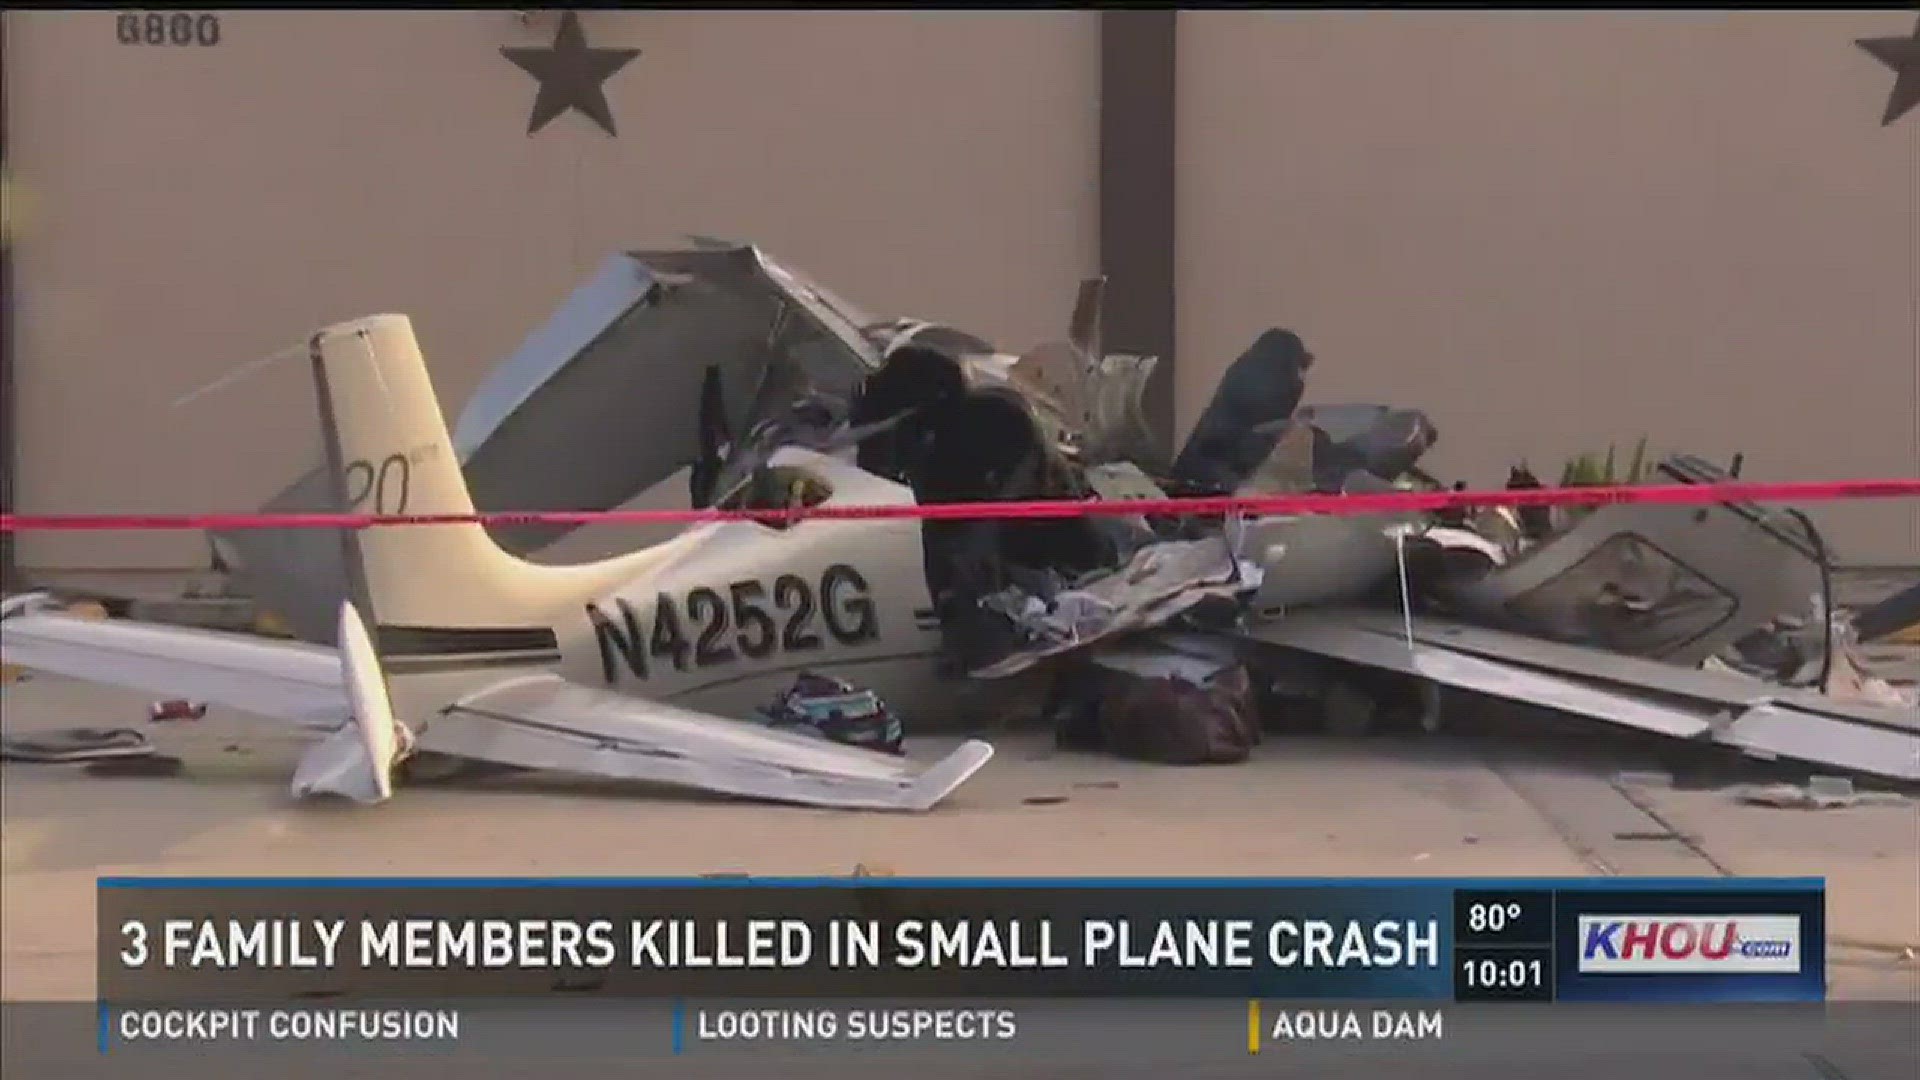 Three family members were killed in a small plan crash near Hobby Airport Thursday afternoon on a flight from Norman, Okla.